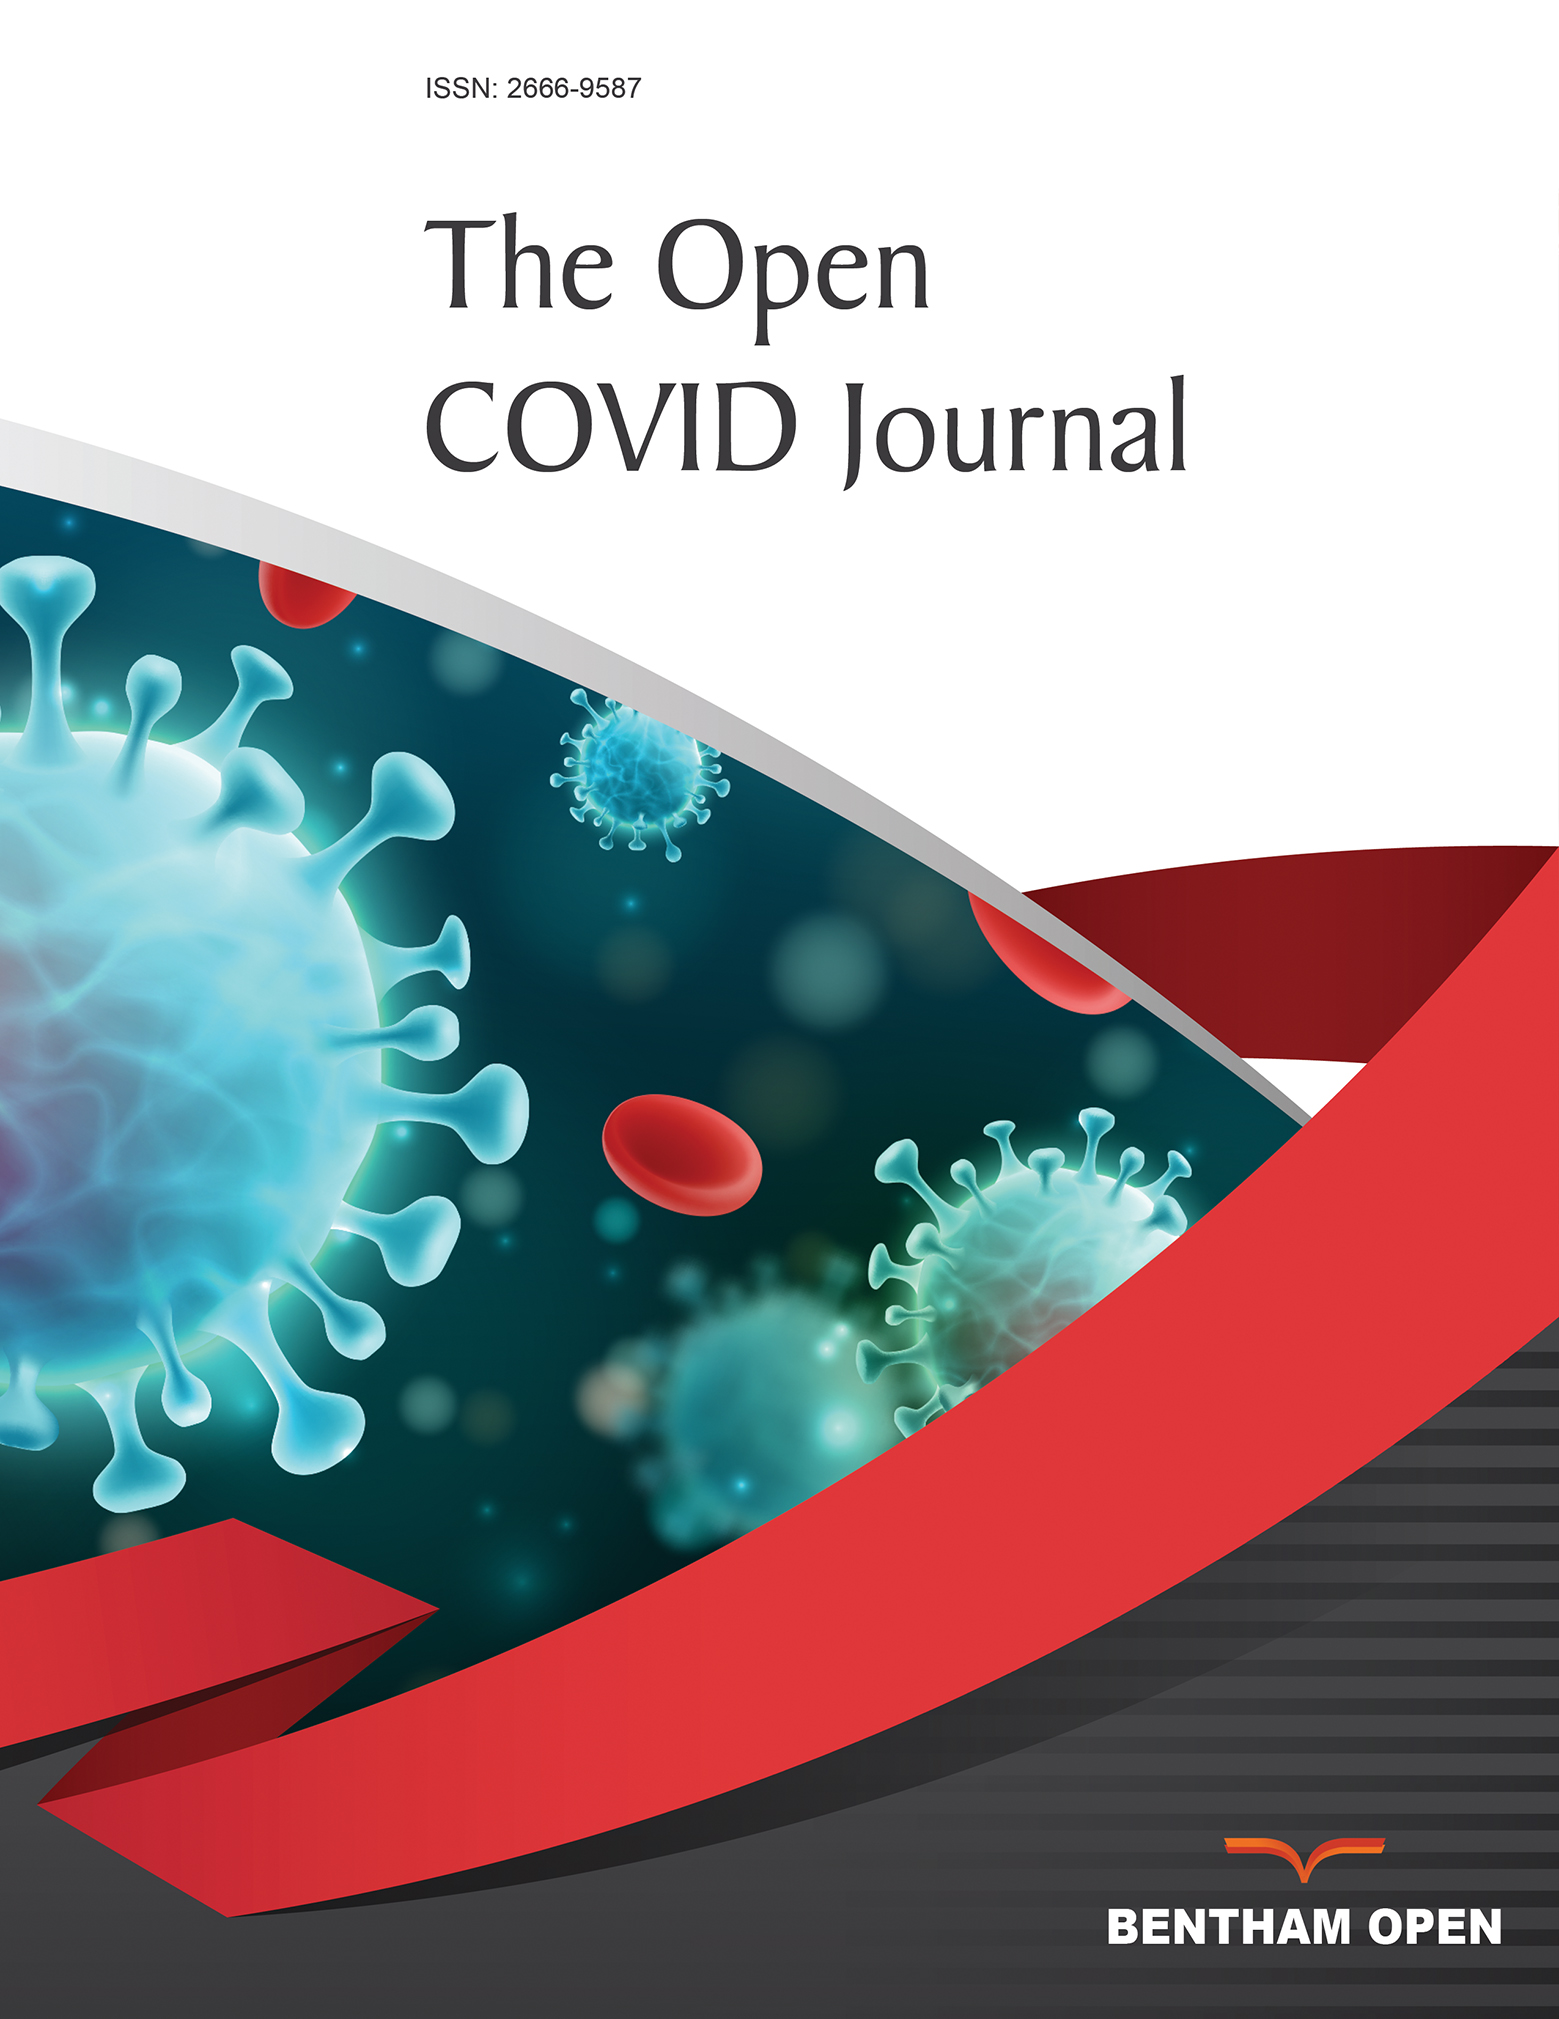 The Open COVID Journal